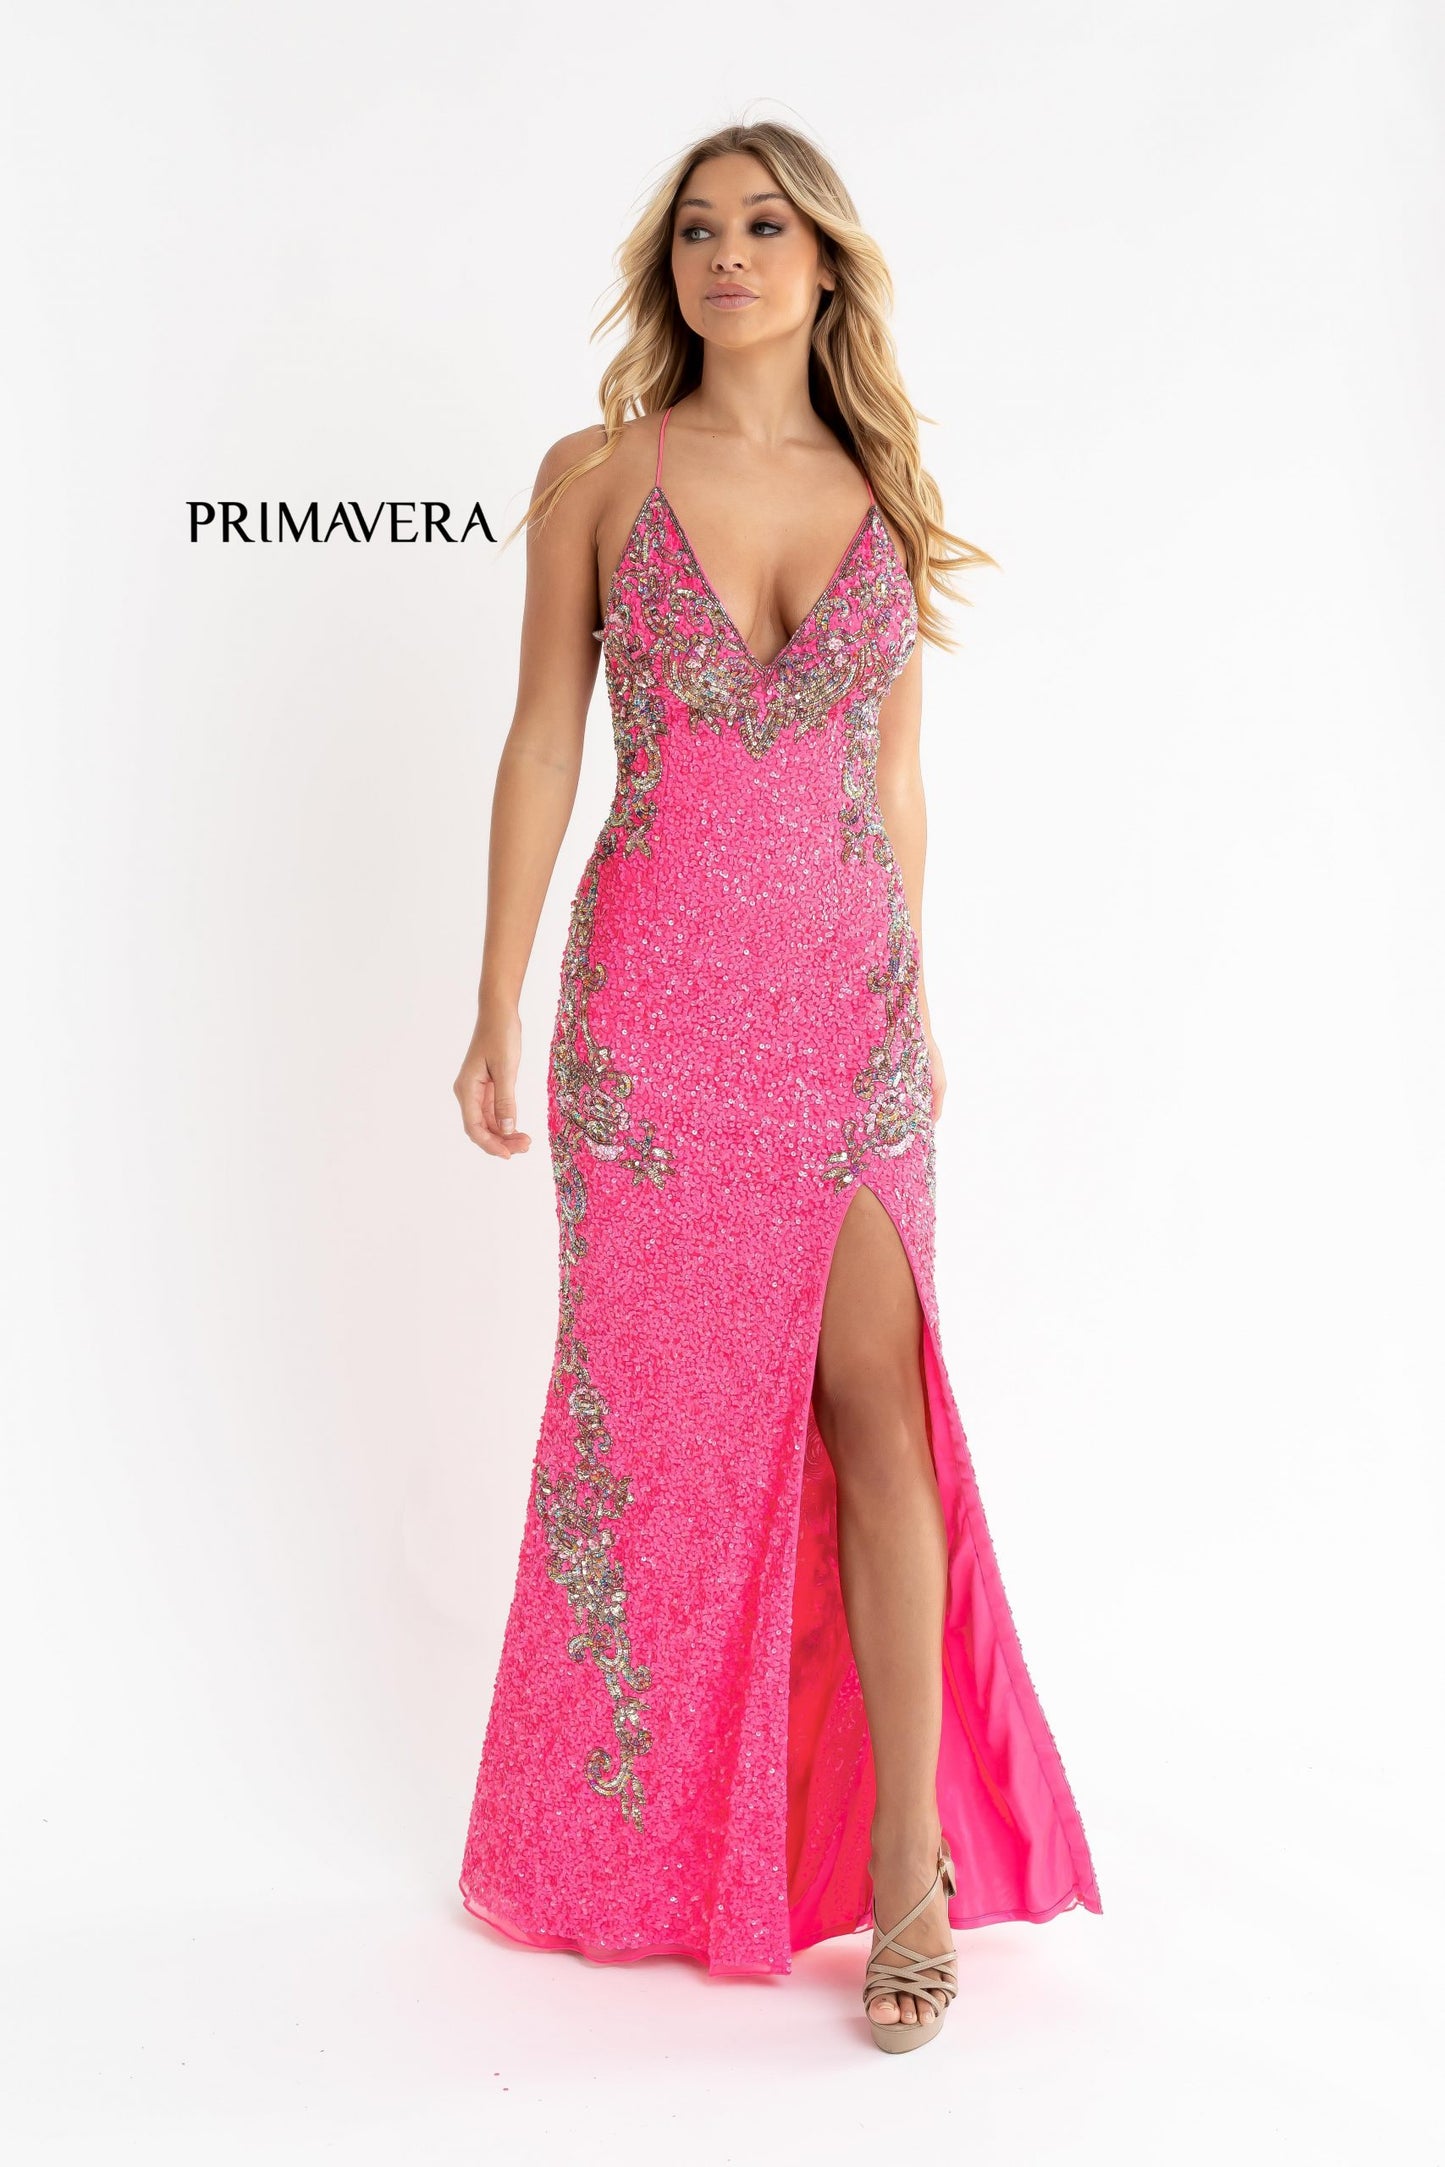 Primavera Couture 3211 is a Long fitted sequin Embellished Formal Evening Gown. This Prom Dress Features a deep V Neck with an open Corset lace up back. Beaded & embellished elegant scroll pattern accentuate curves. Fully beaded prom dress with floral pattern and side slit. Long Sequin Gown featuring a v neckline. slit in the fitted skirt, Slit in Thigh. Stunning Pageant Dress, Prom Gown & More!